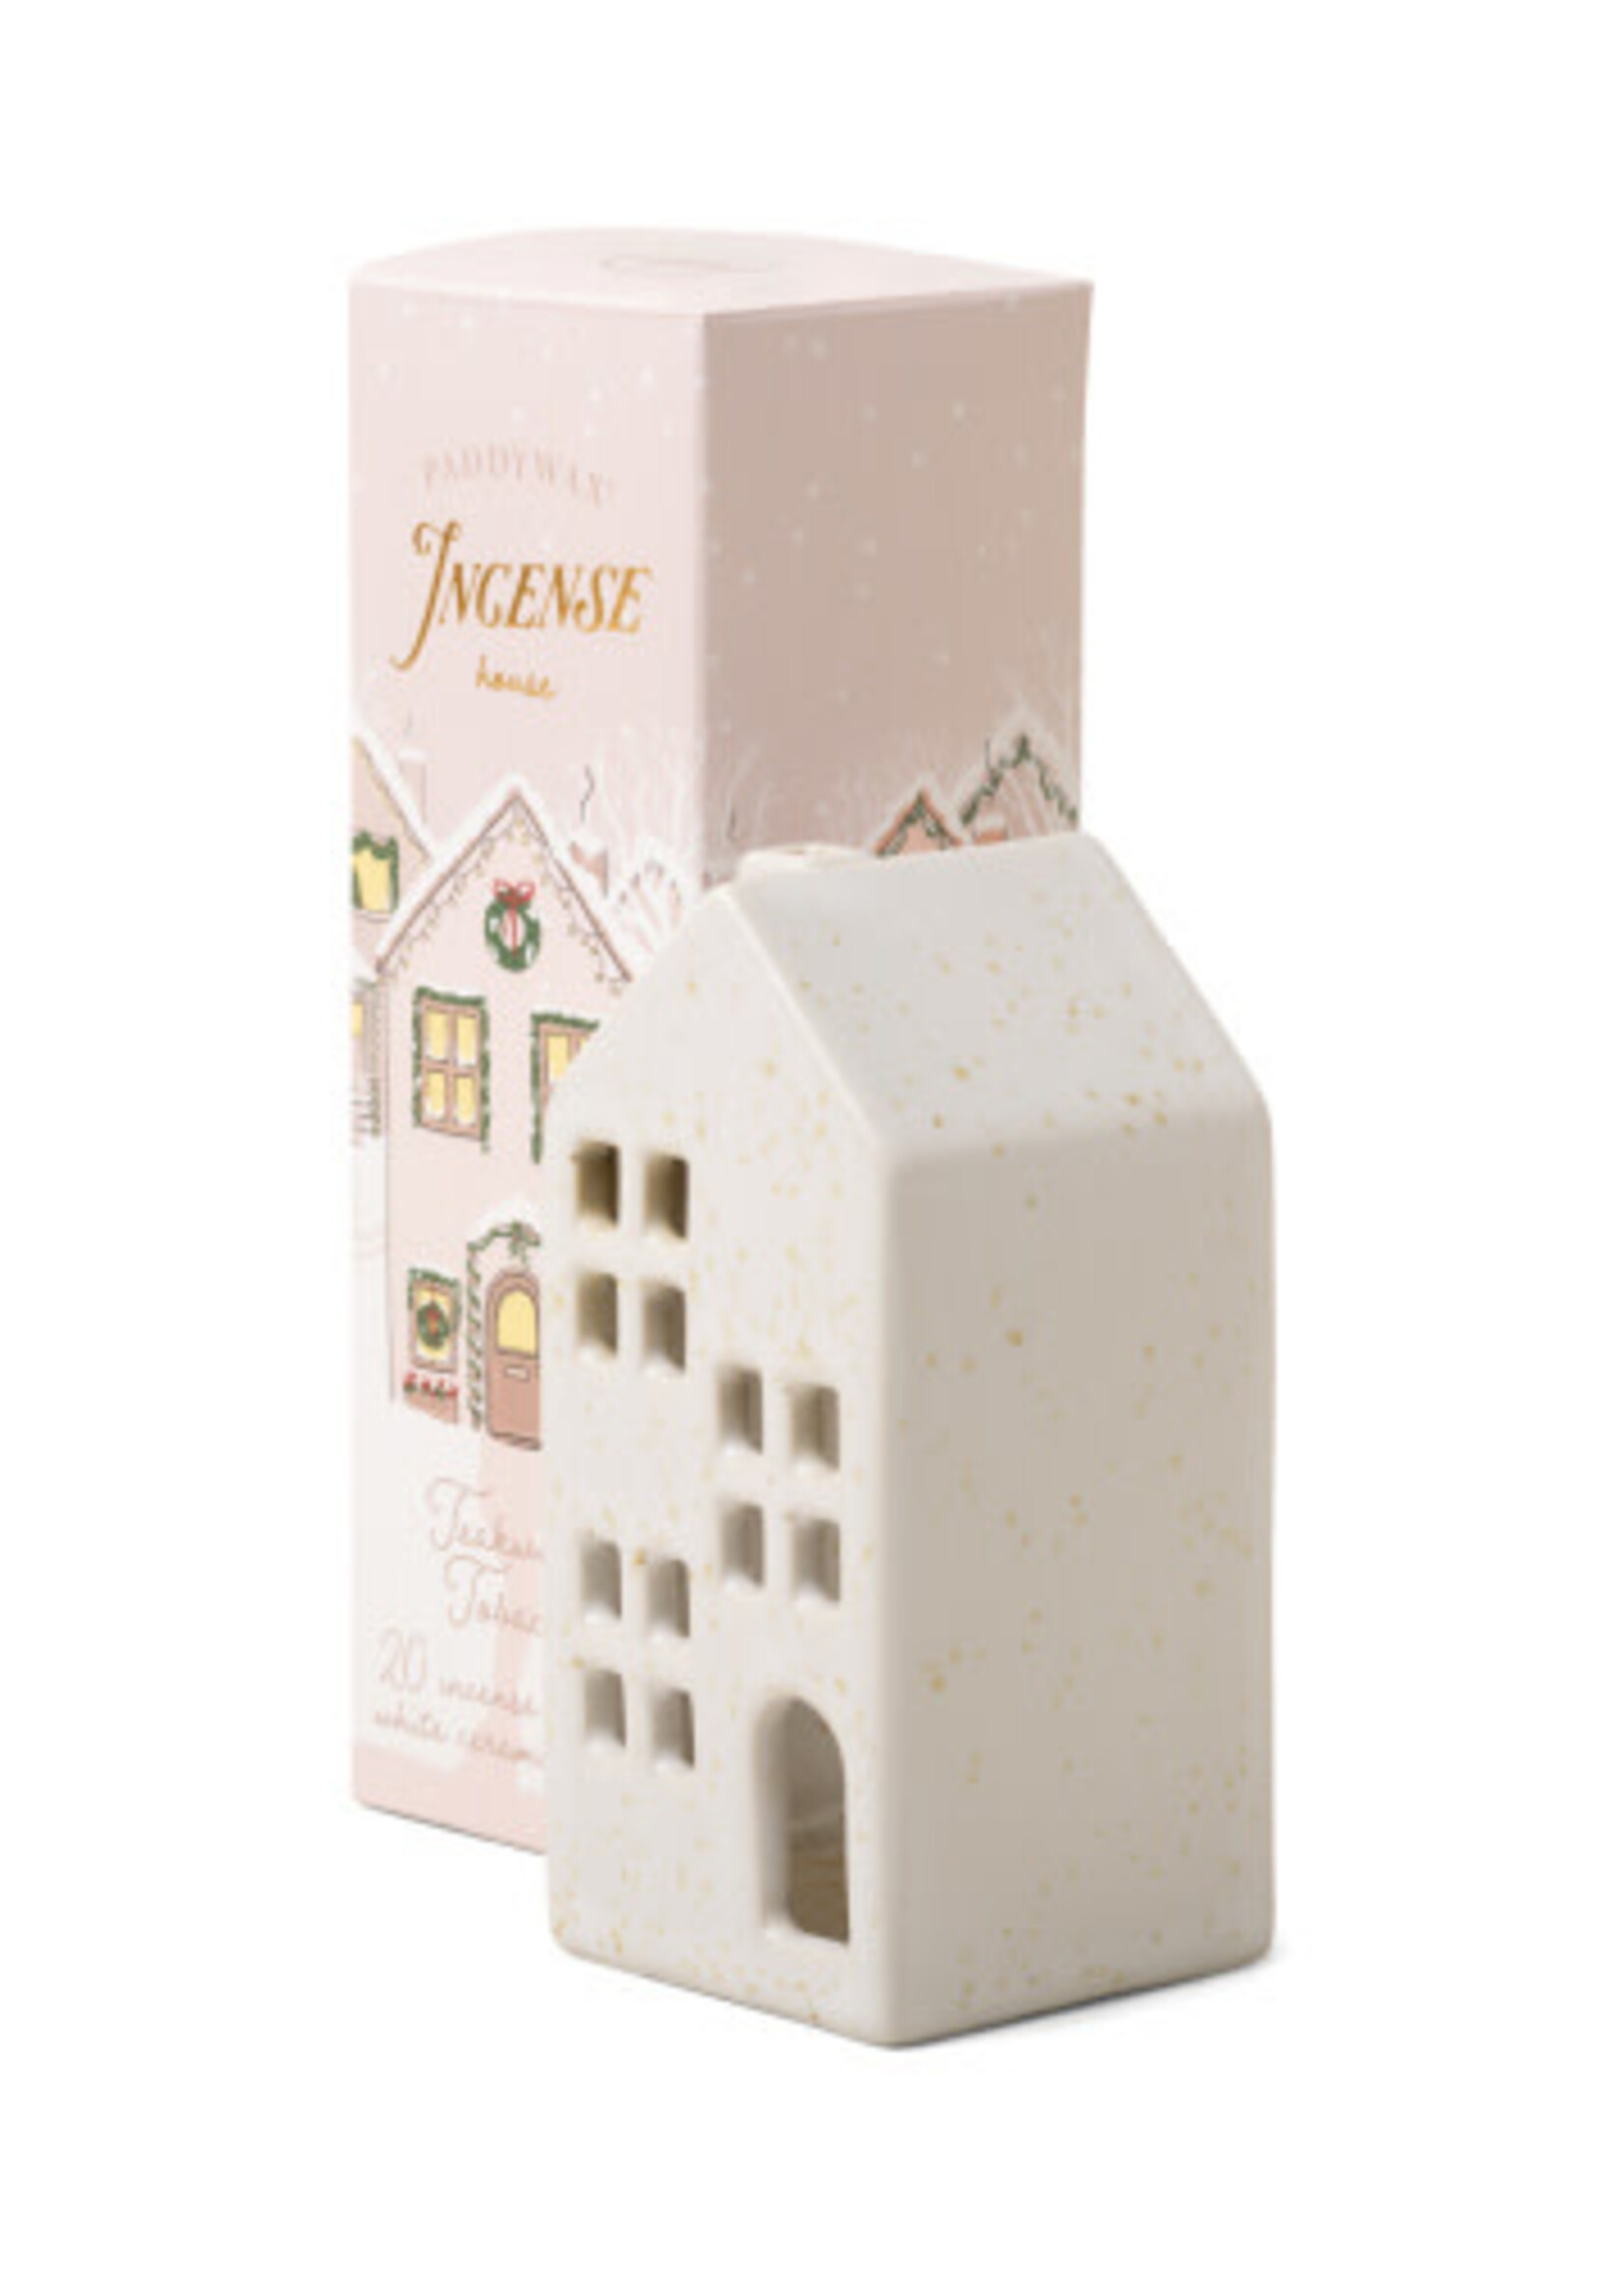 Ceramic House with Incense